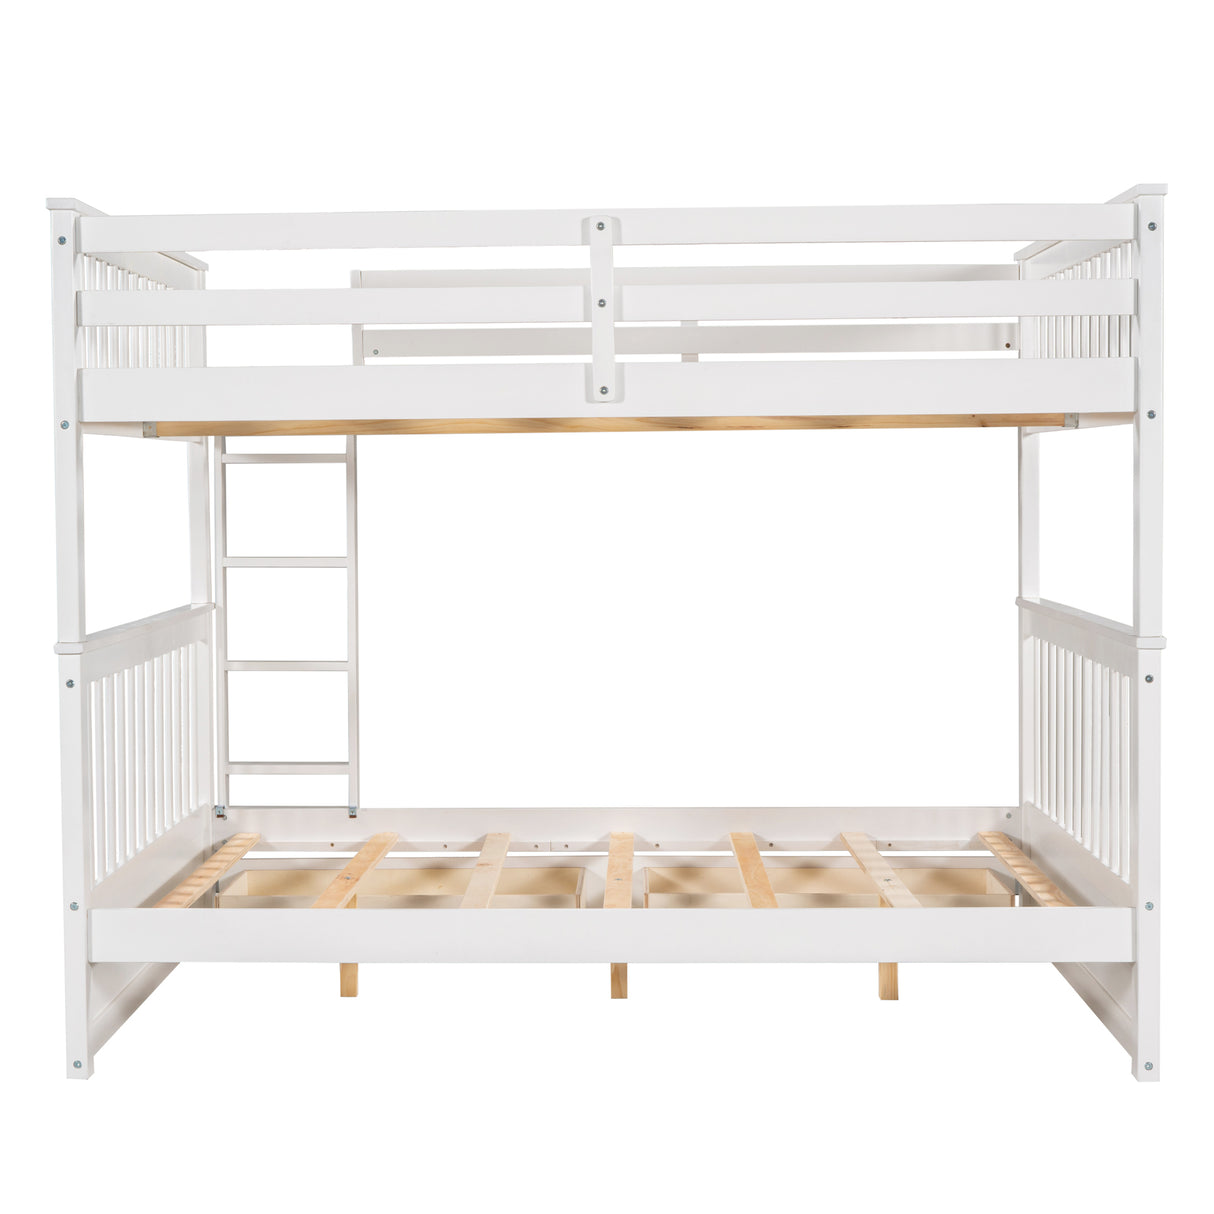 Full-Over-Full Bunk Bed with Ladders and Two Storage Drawers (White) - Home Elegance USA